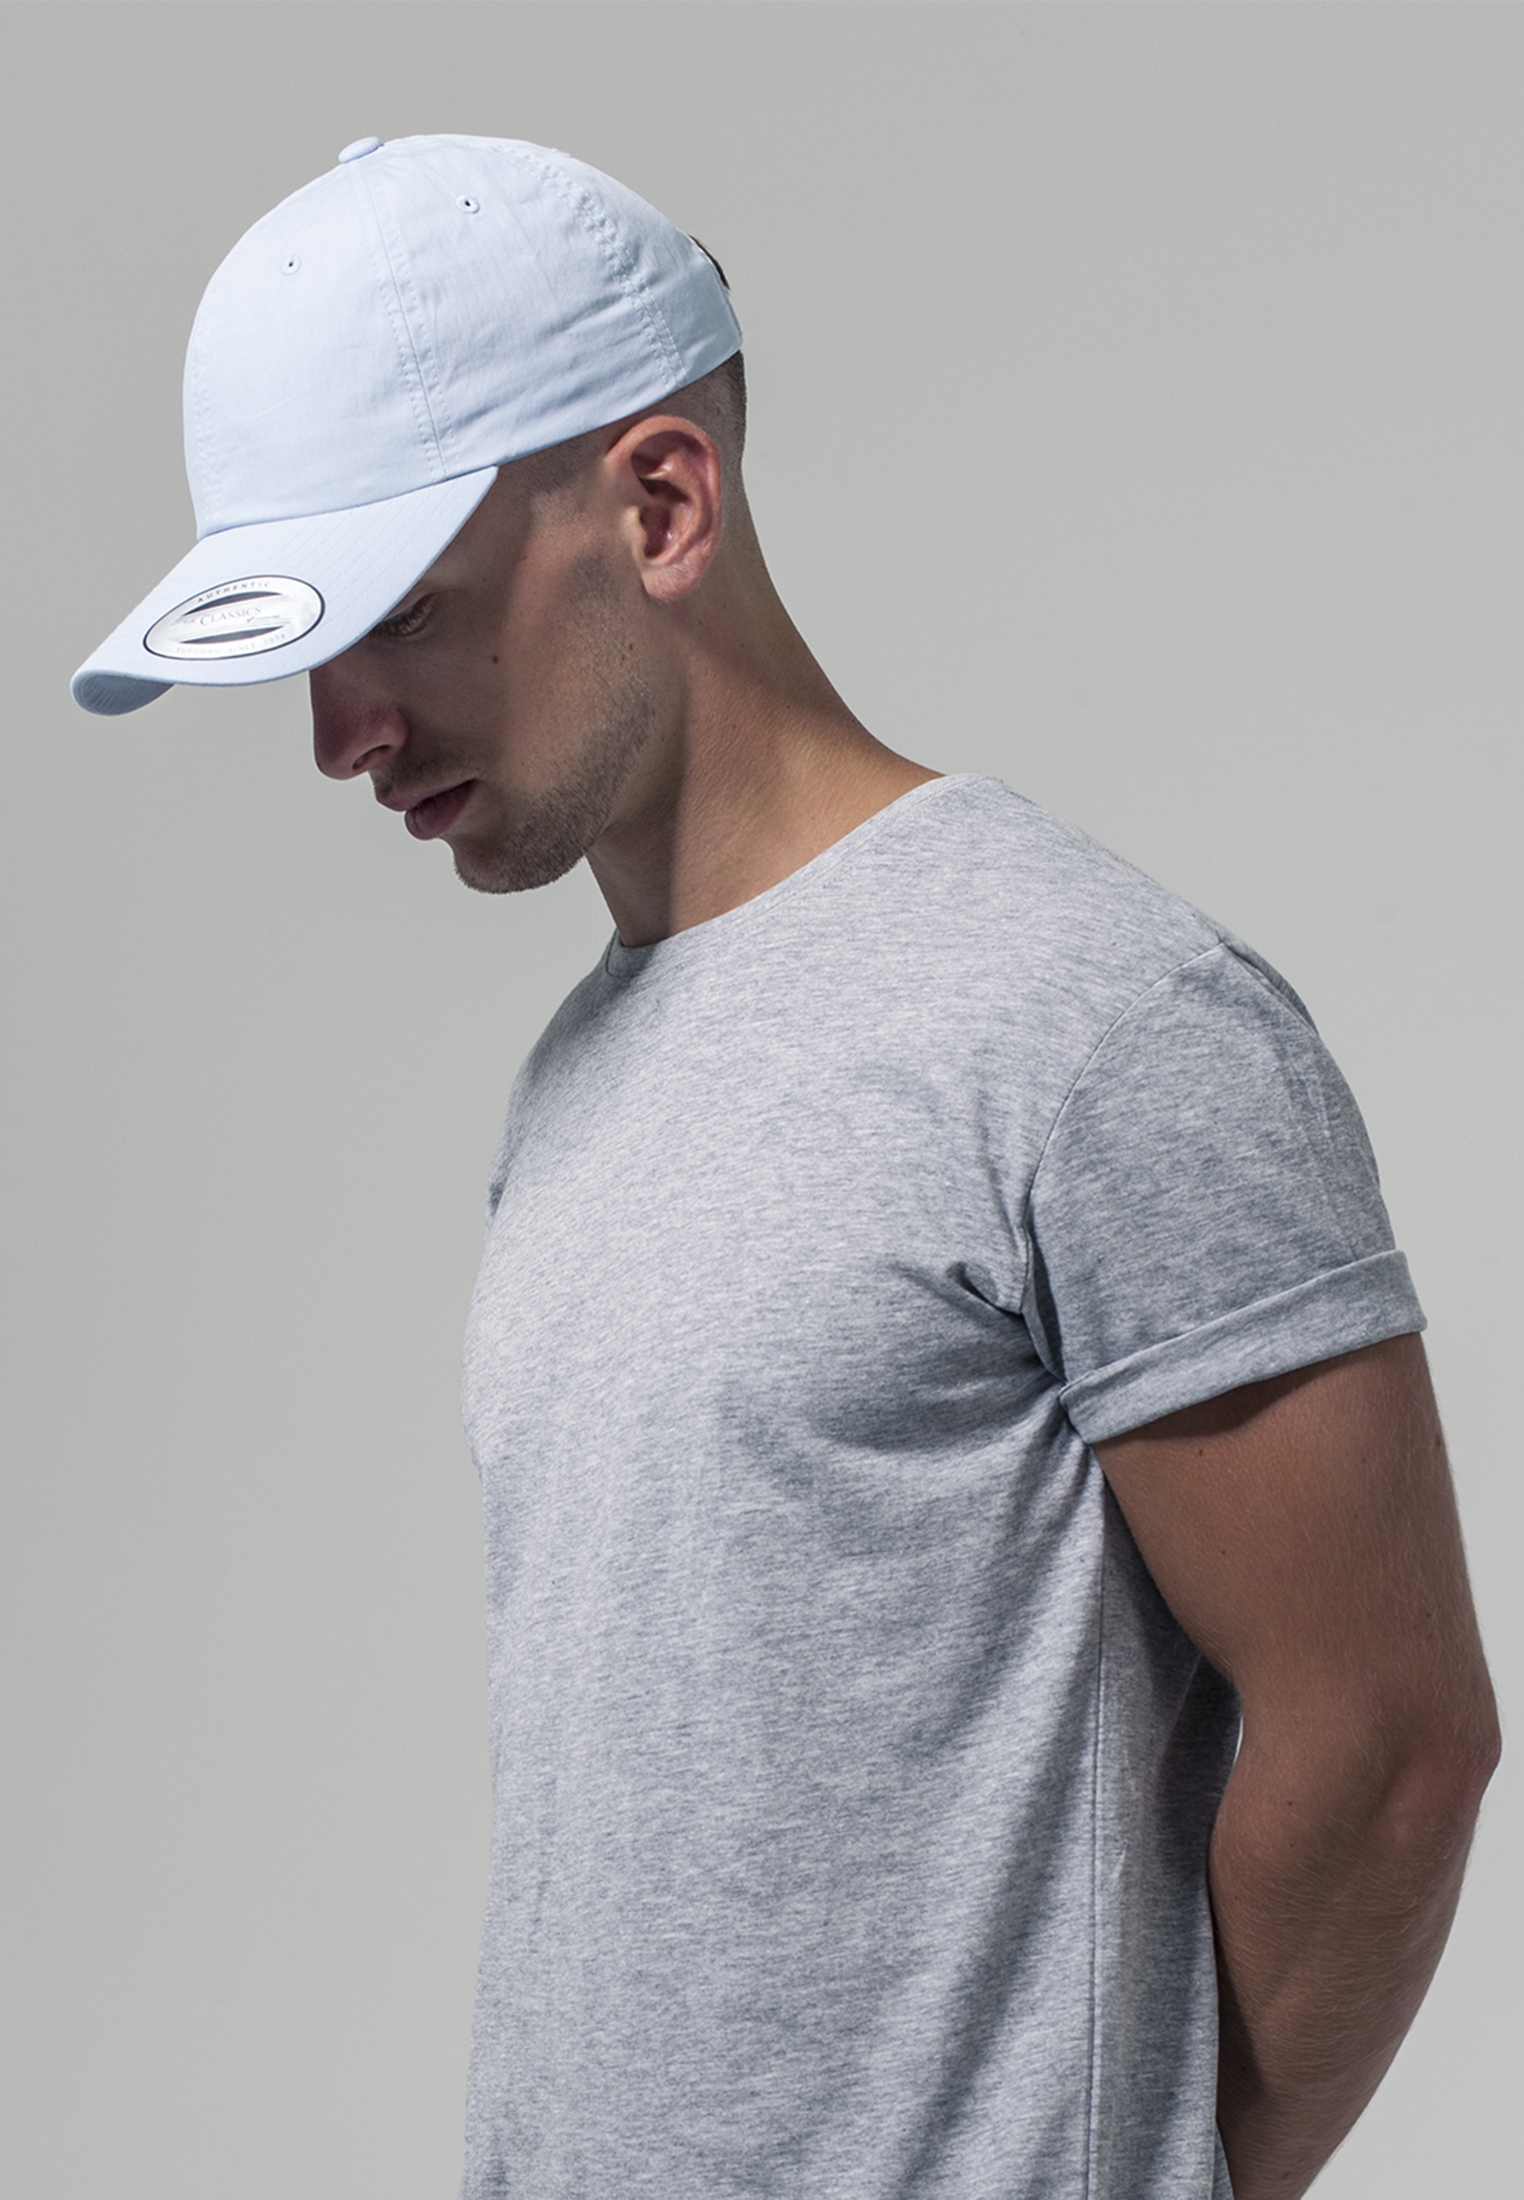 Profile Low Cap-6245W Washed